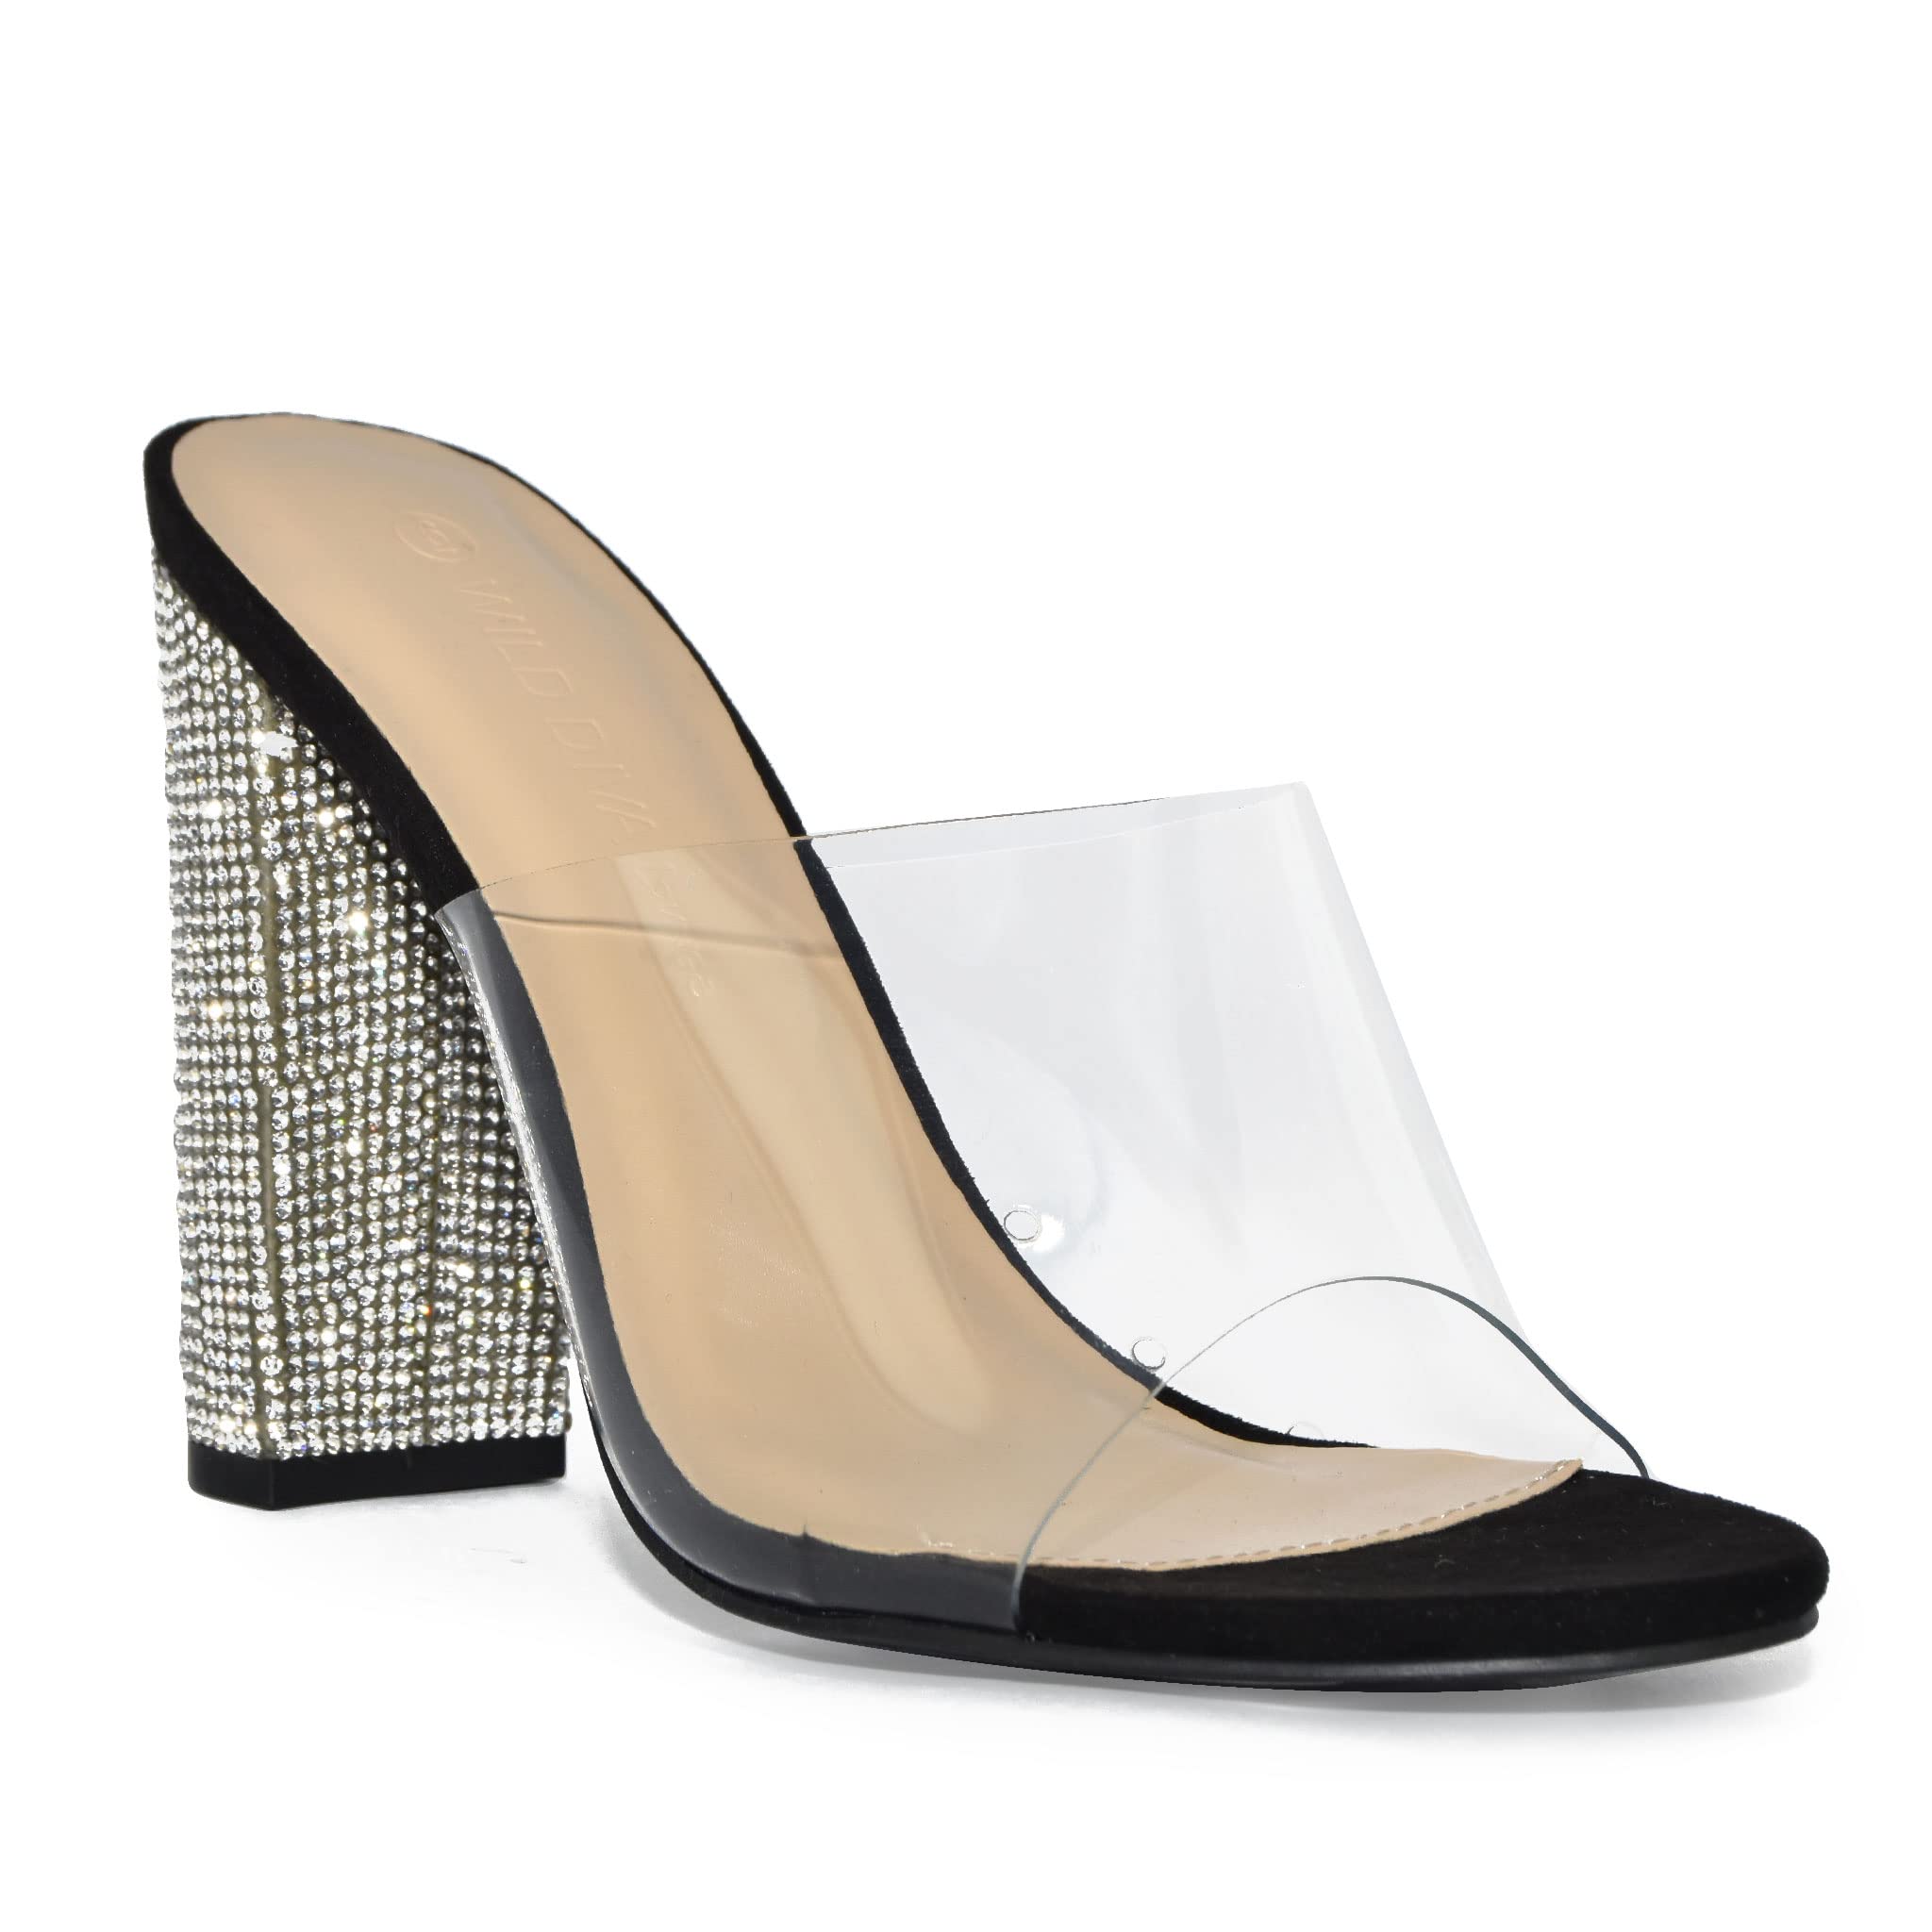 Cinderella | Clear Strap Block High Heel Mules | Cutely Covered